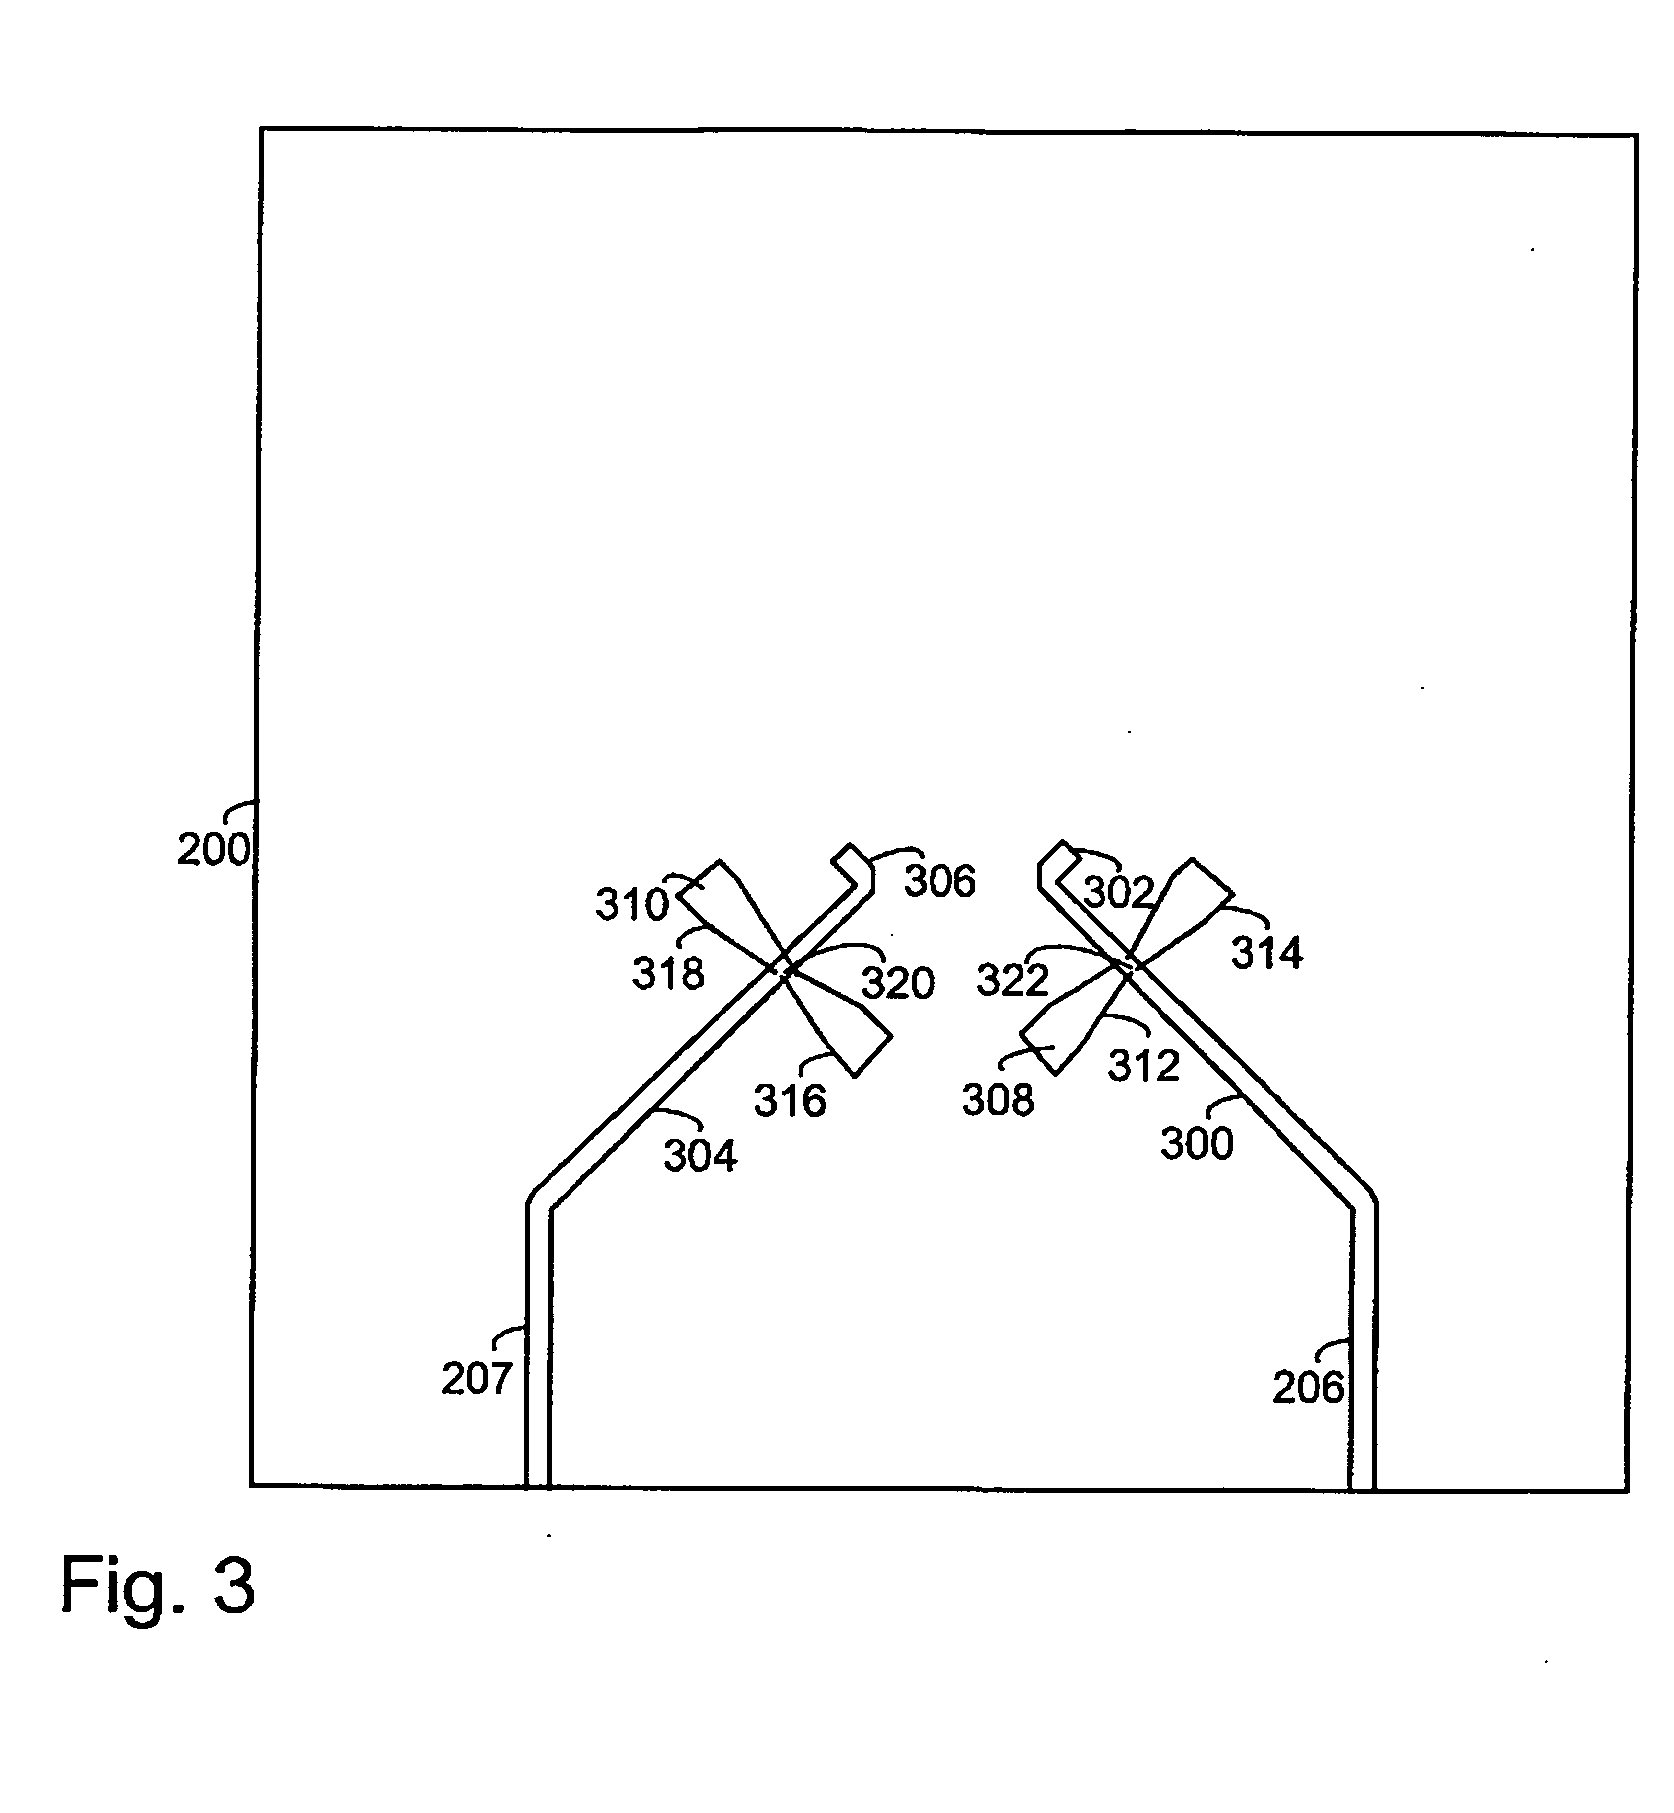 Dual-polarized microstrip patch antenna structure